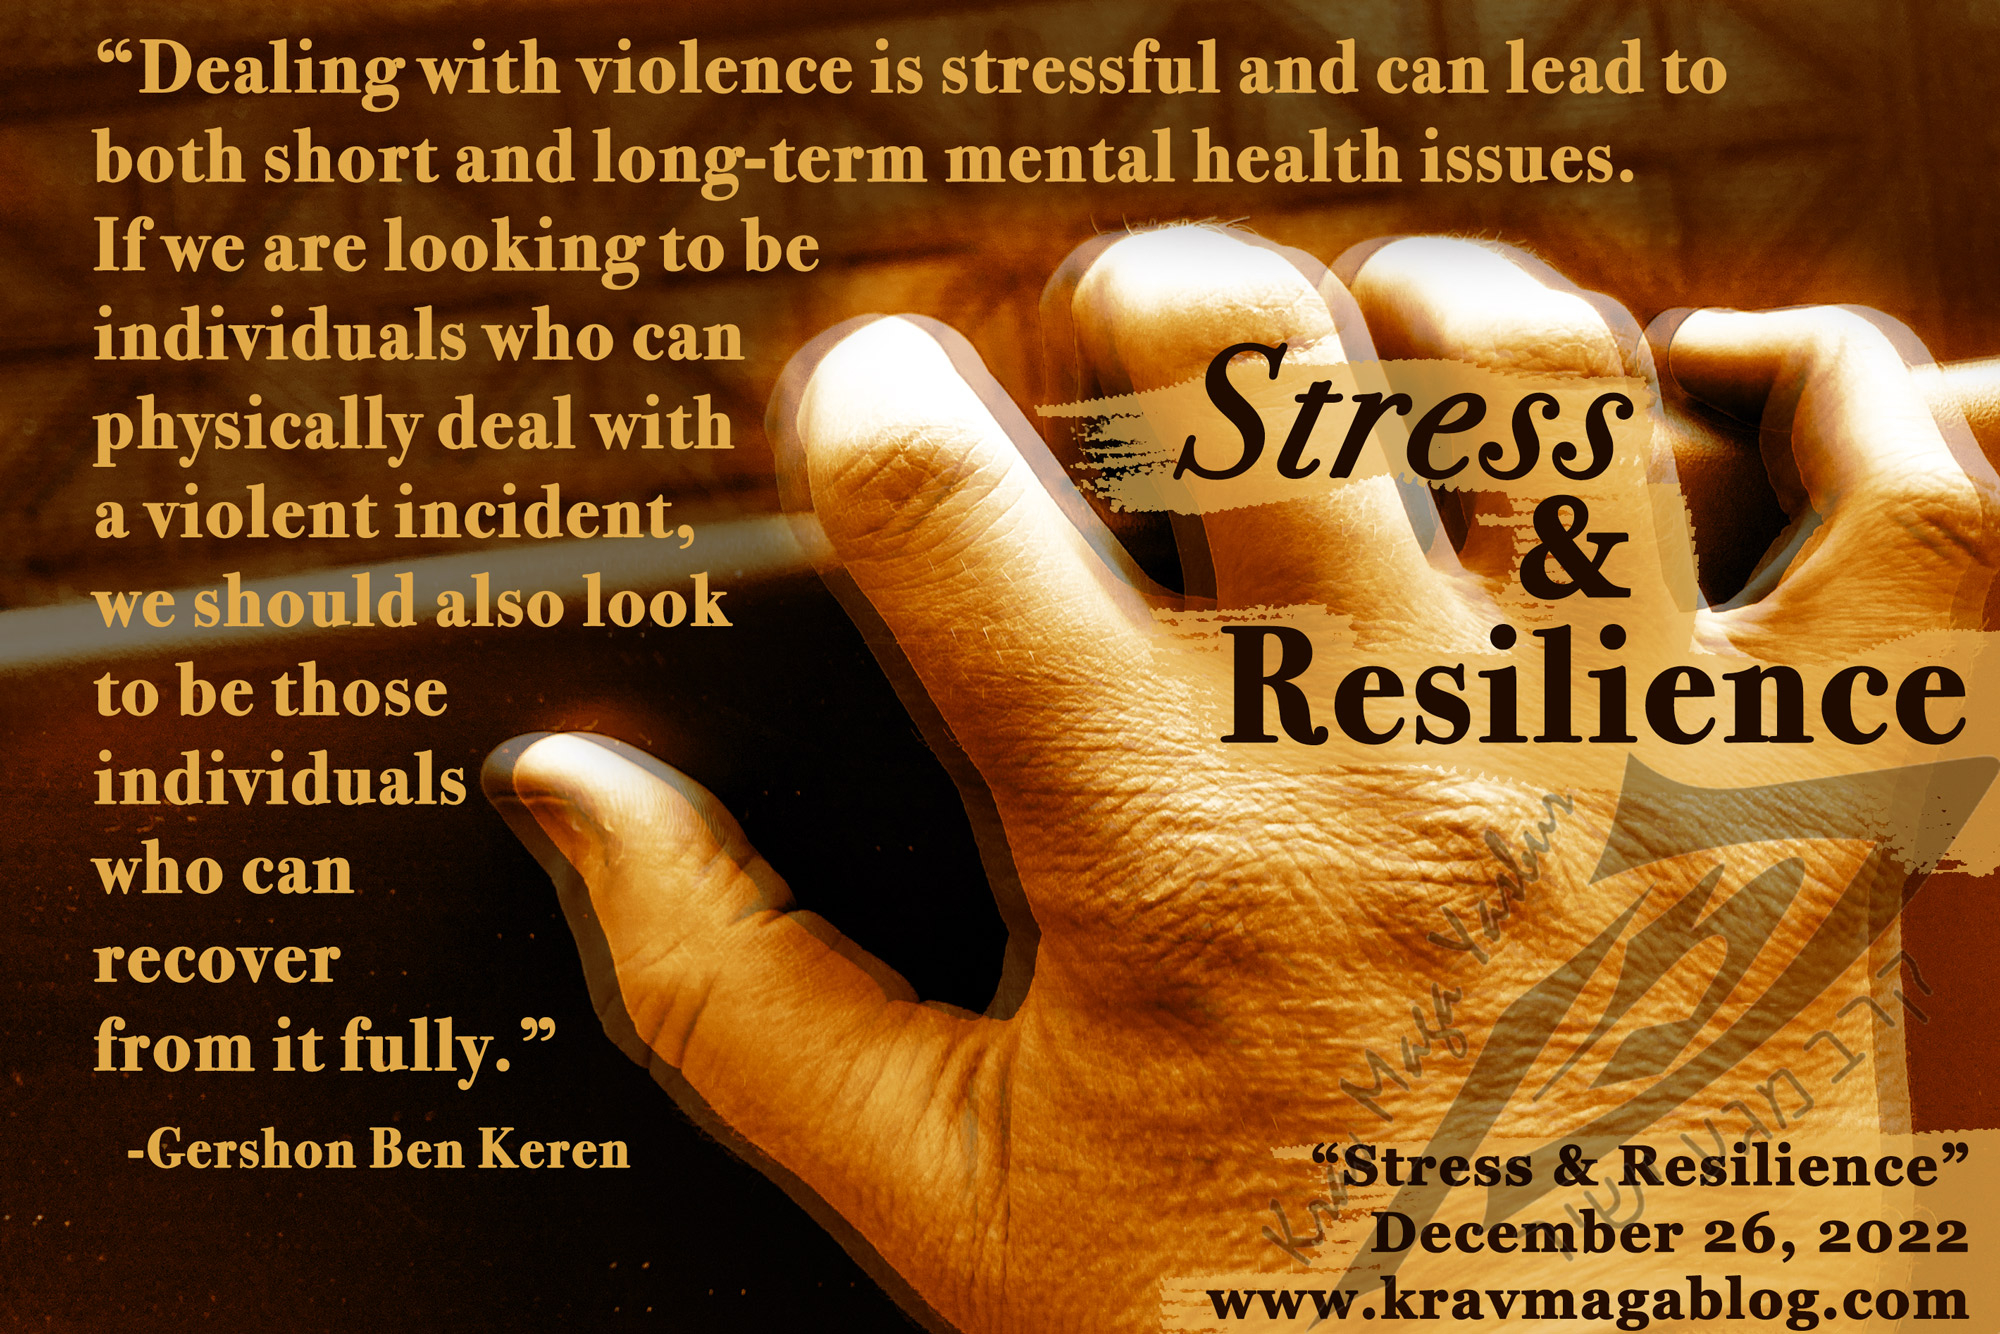 Blog About Stress & Resilience